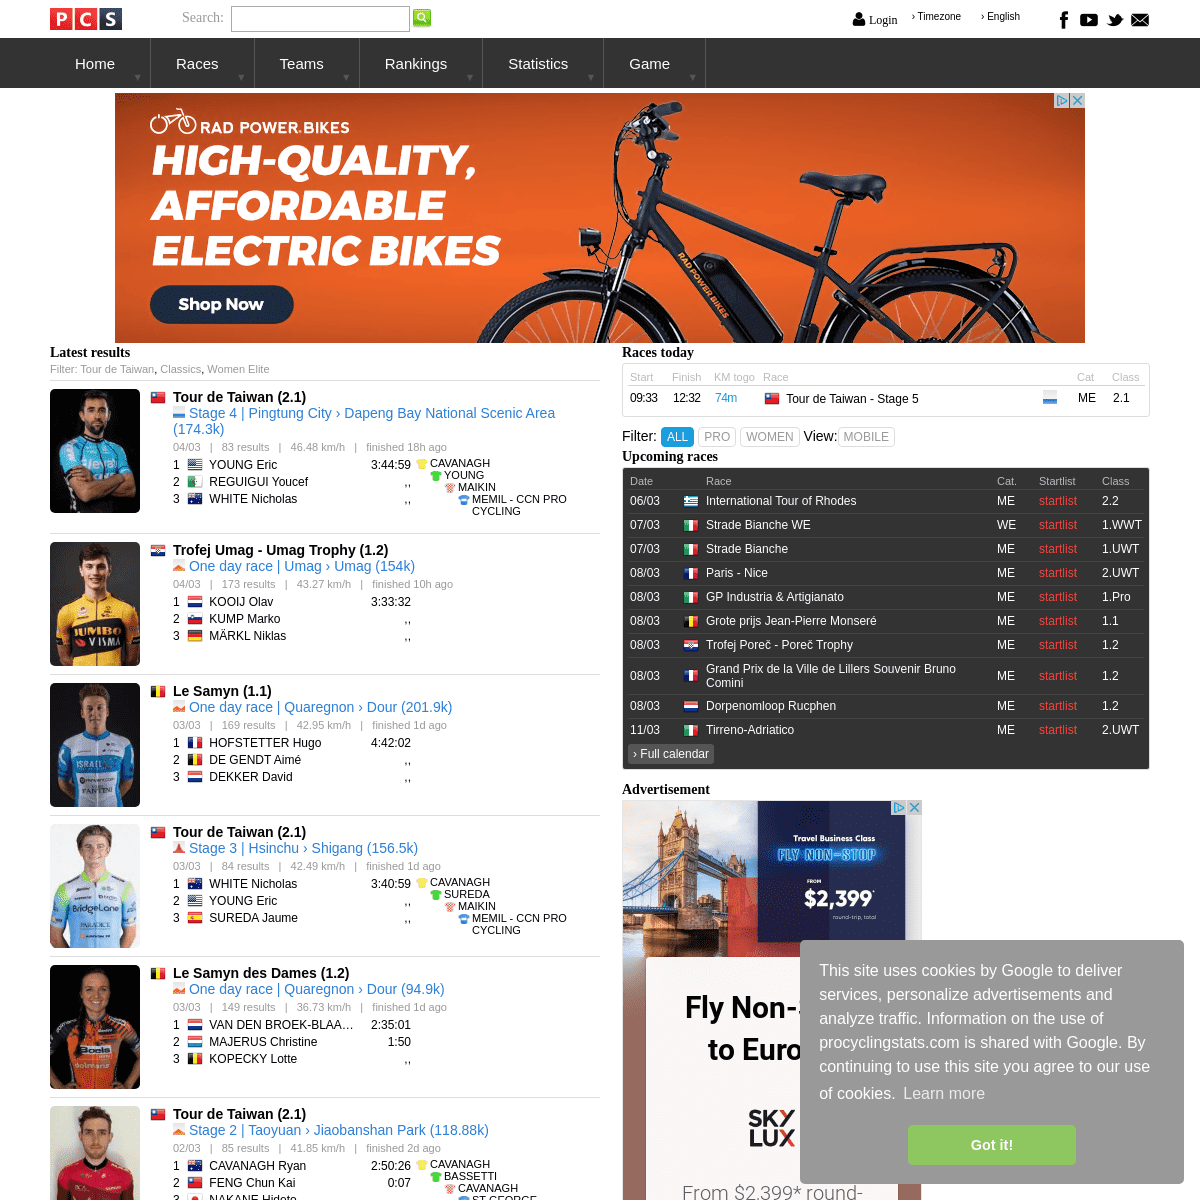 A complete backup of procyclingstats.com